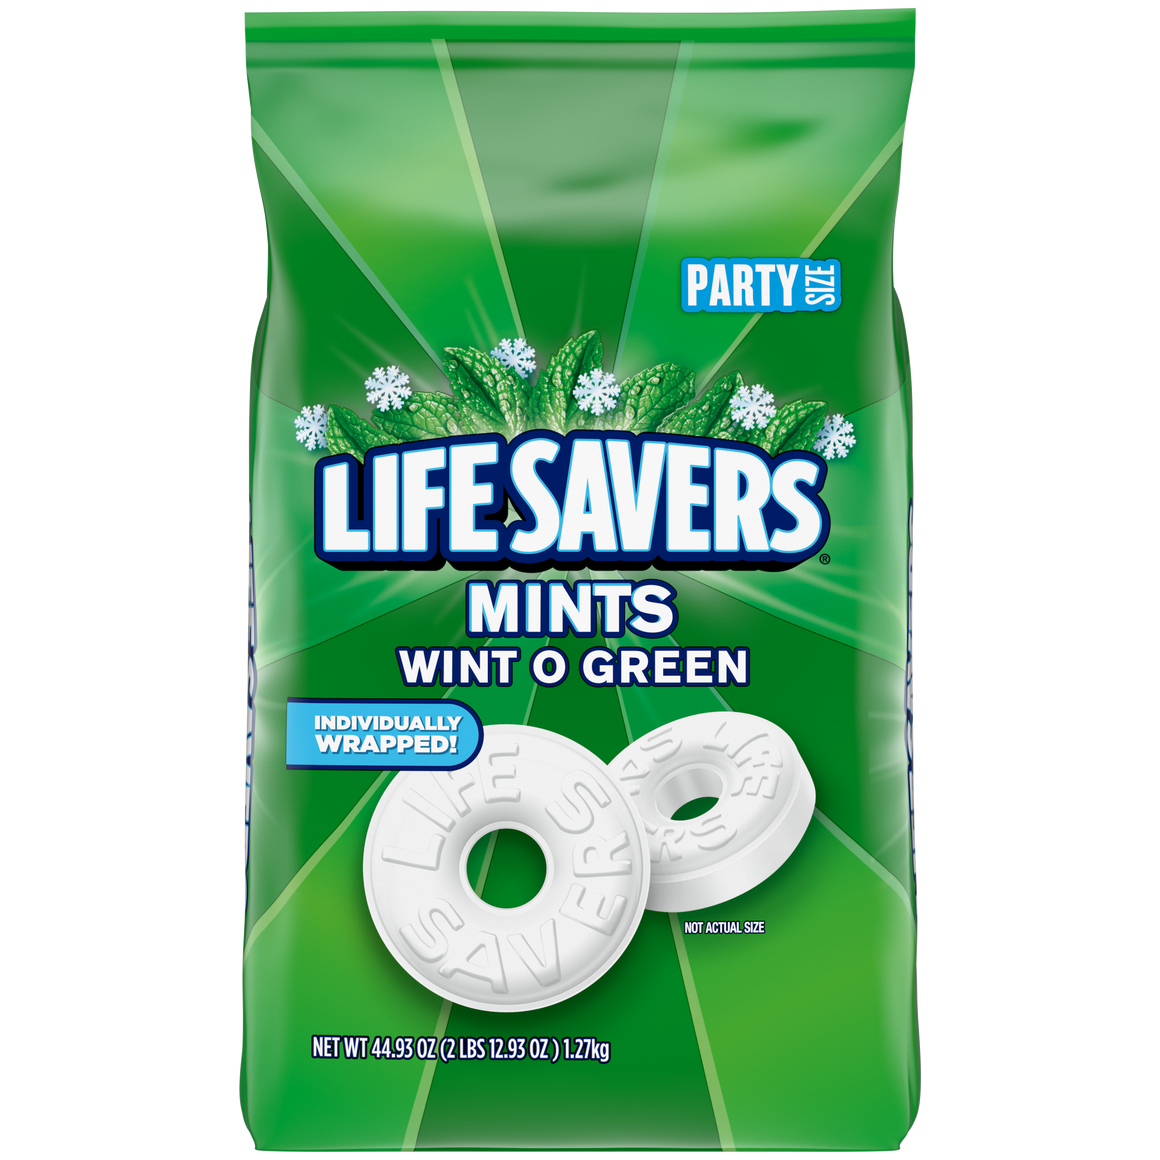 Lifesavers Wint O Green Mints 44.93 oz. Bag Party Size - For fresh candy and great service, visit www.allcitycandy.com